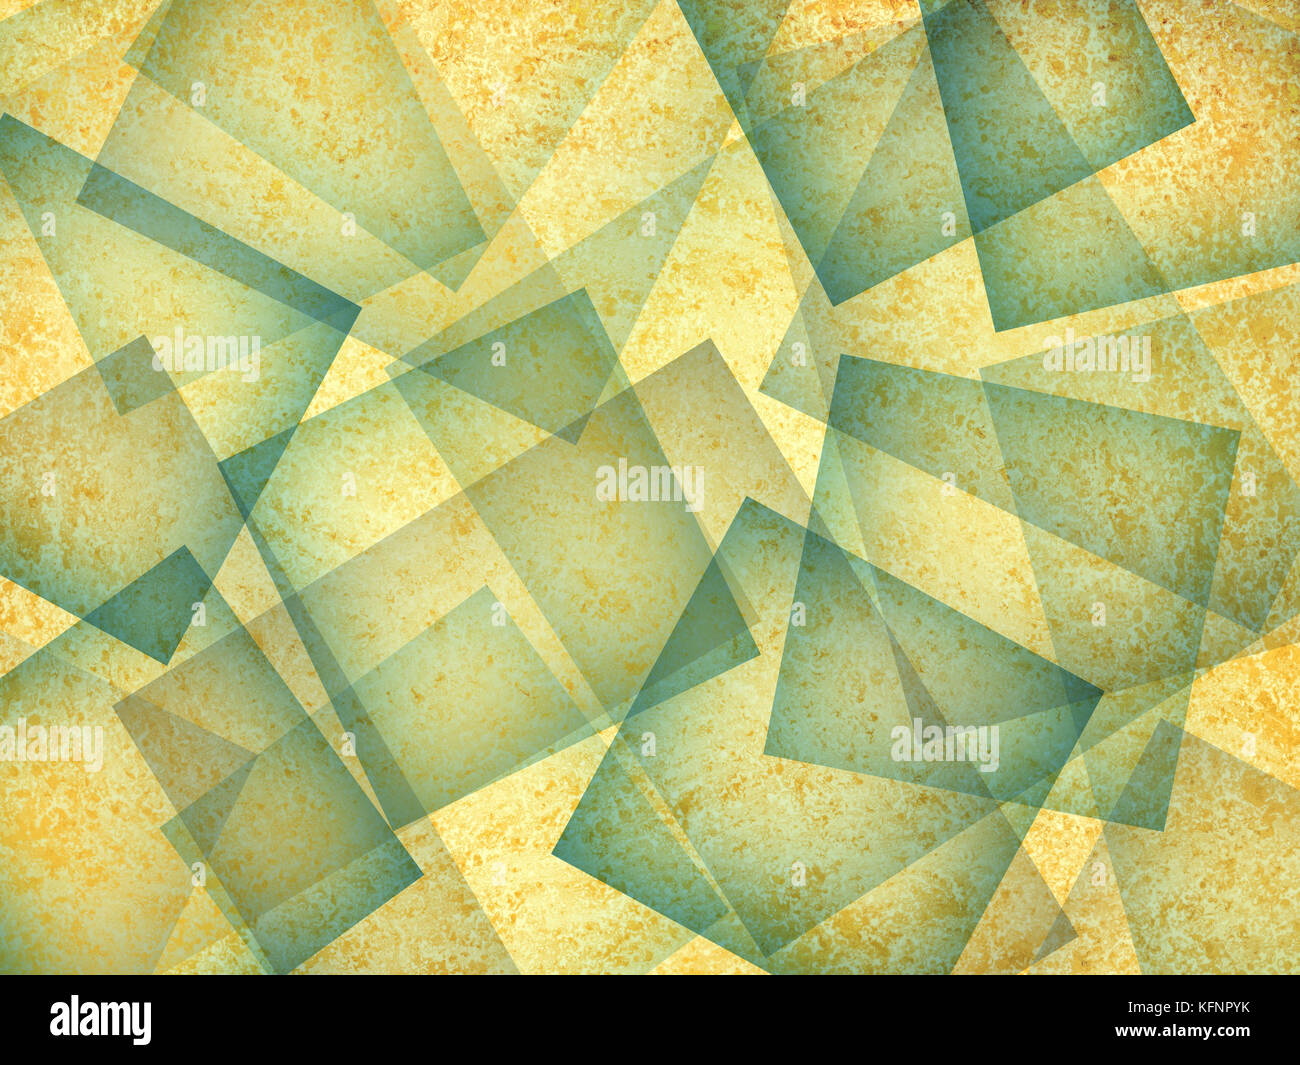 abstract yellow gold background with blue diamond and square shapes, layers of intersecting angles, transparent with intricate texture, interesting mo Stock Photo